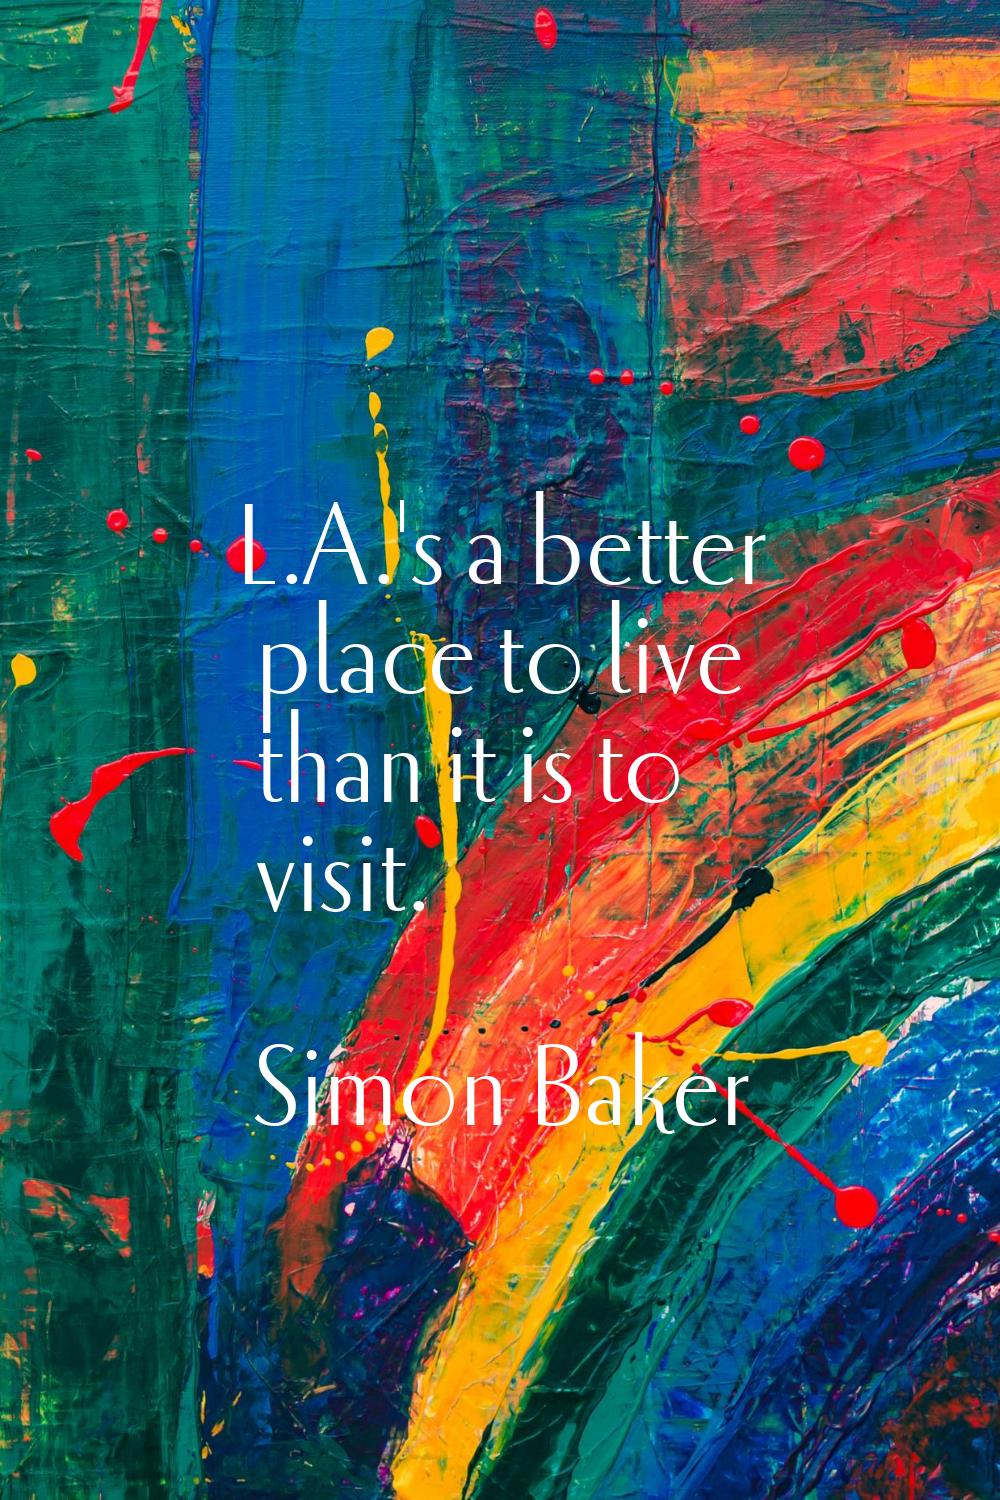 L.A.'s a better place to live than it is to visit.